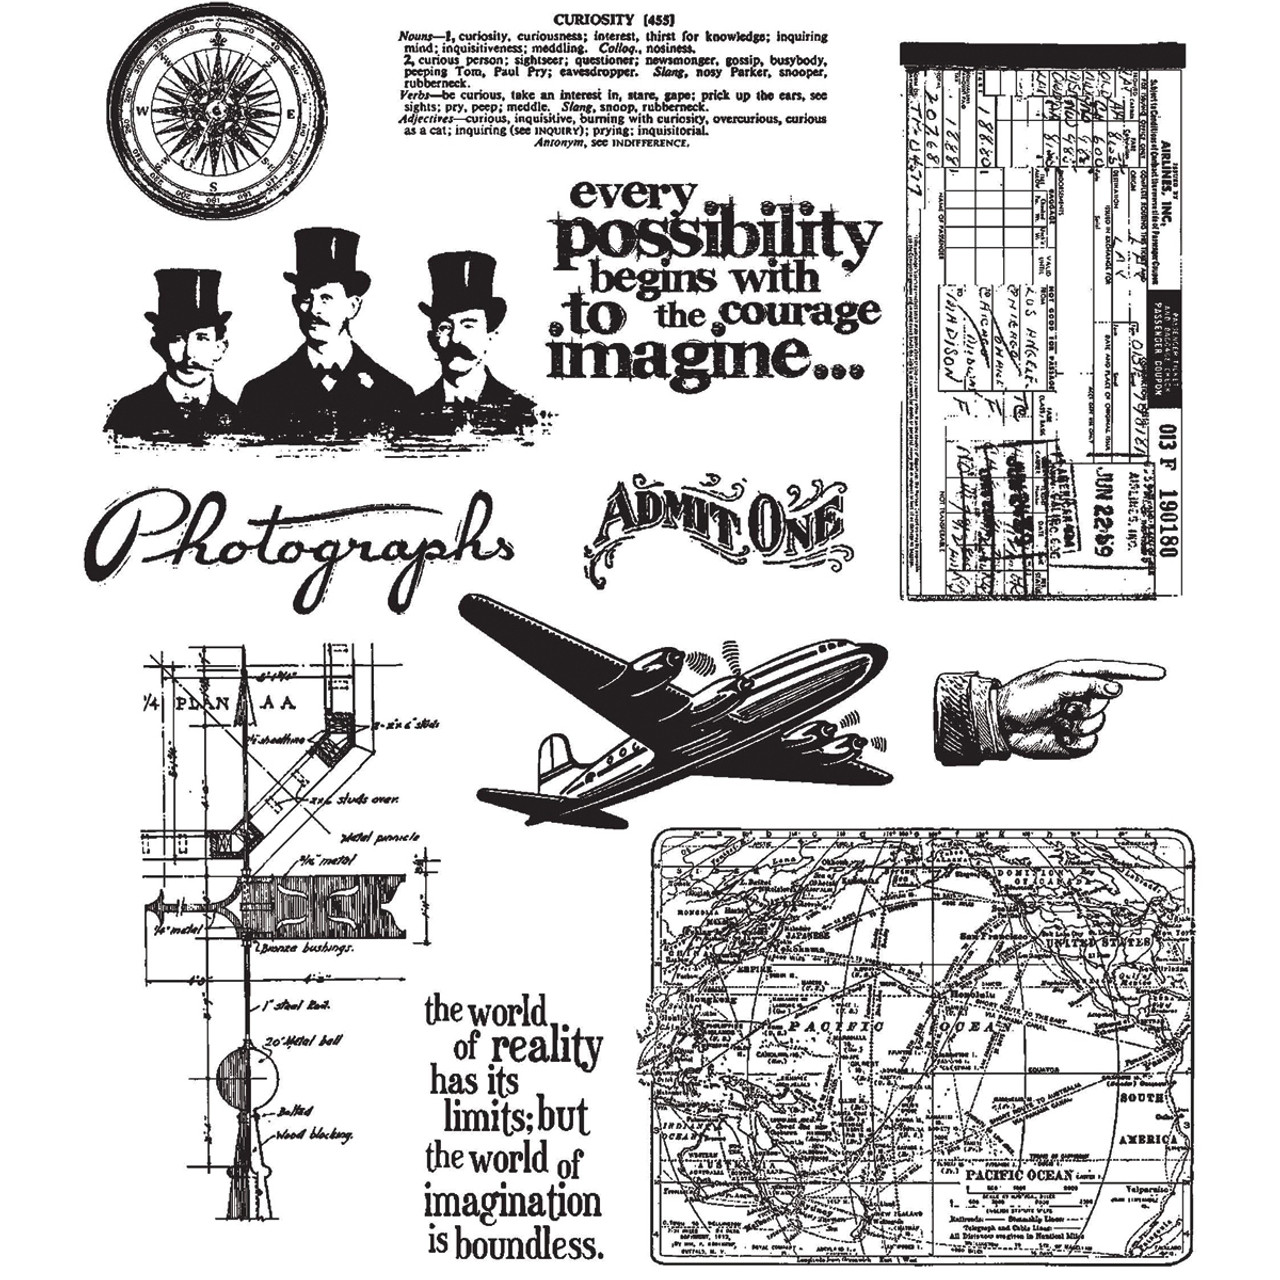 Tim Holtz Cling Stamps 7x8.5: Field Notes (CMS396)